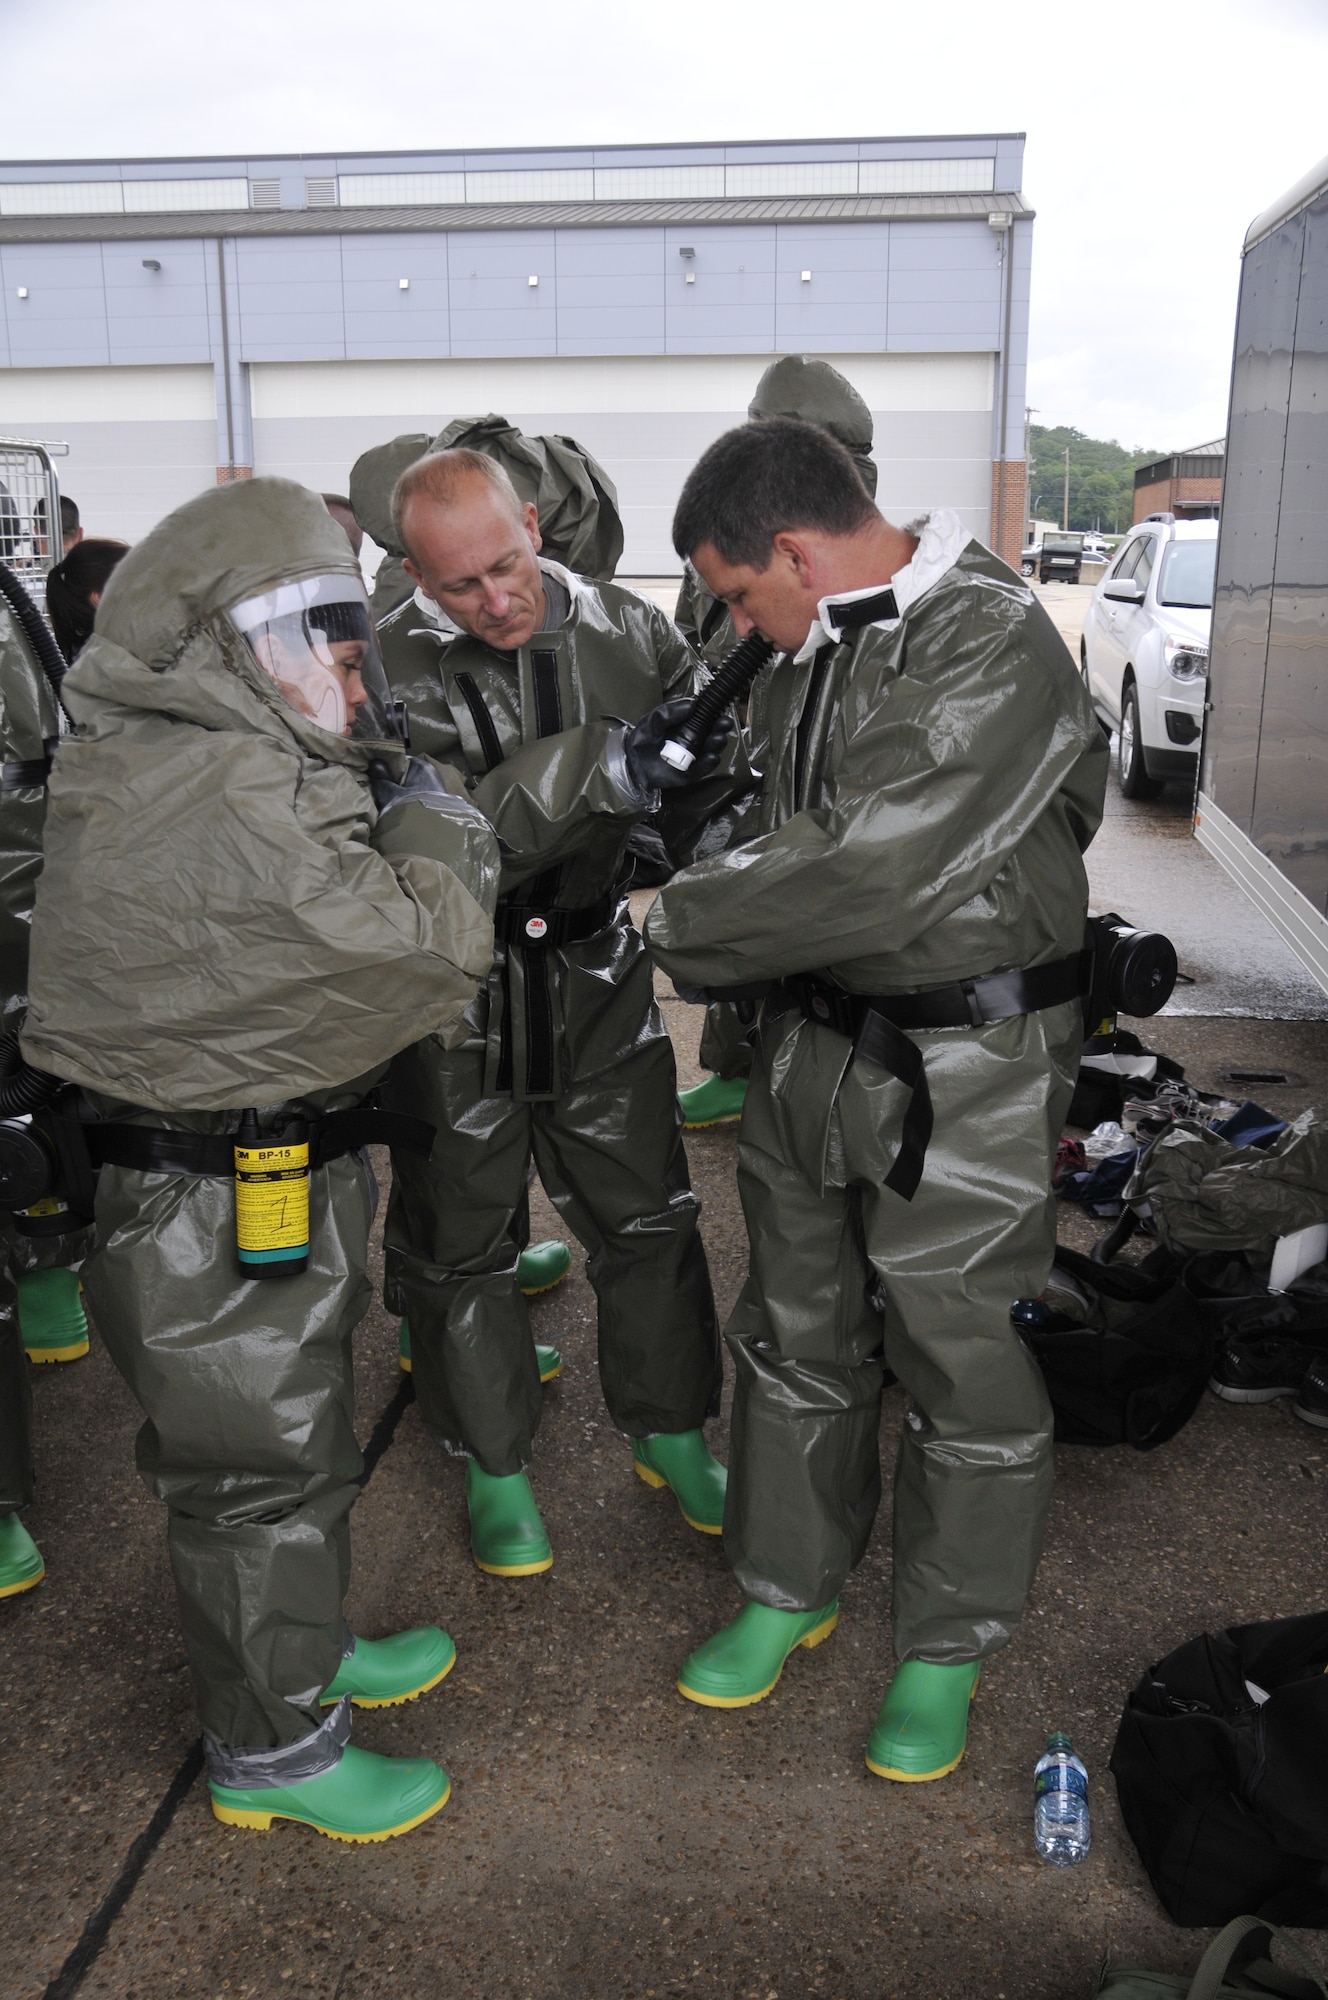 Airmen from the 188th Wing practice decontaminating a victim of a contamination scenario during decontamination training at Ebbing Air National Guard Base, Arkansas, July 17. The volunteers, who were from various parts of the wing, learned how to set up a decontamination tent and clean victims of various chemical or nuclear hazards. This training will aid the wing in its mission to support Arkansas citizens in times of disaster. (U.S. Air National Guard photo by Staff Sgt. John Suleski/released)